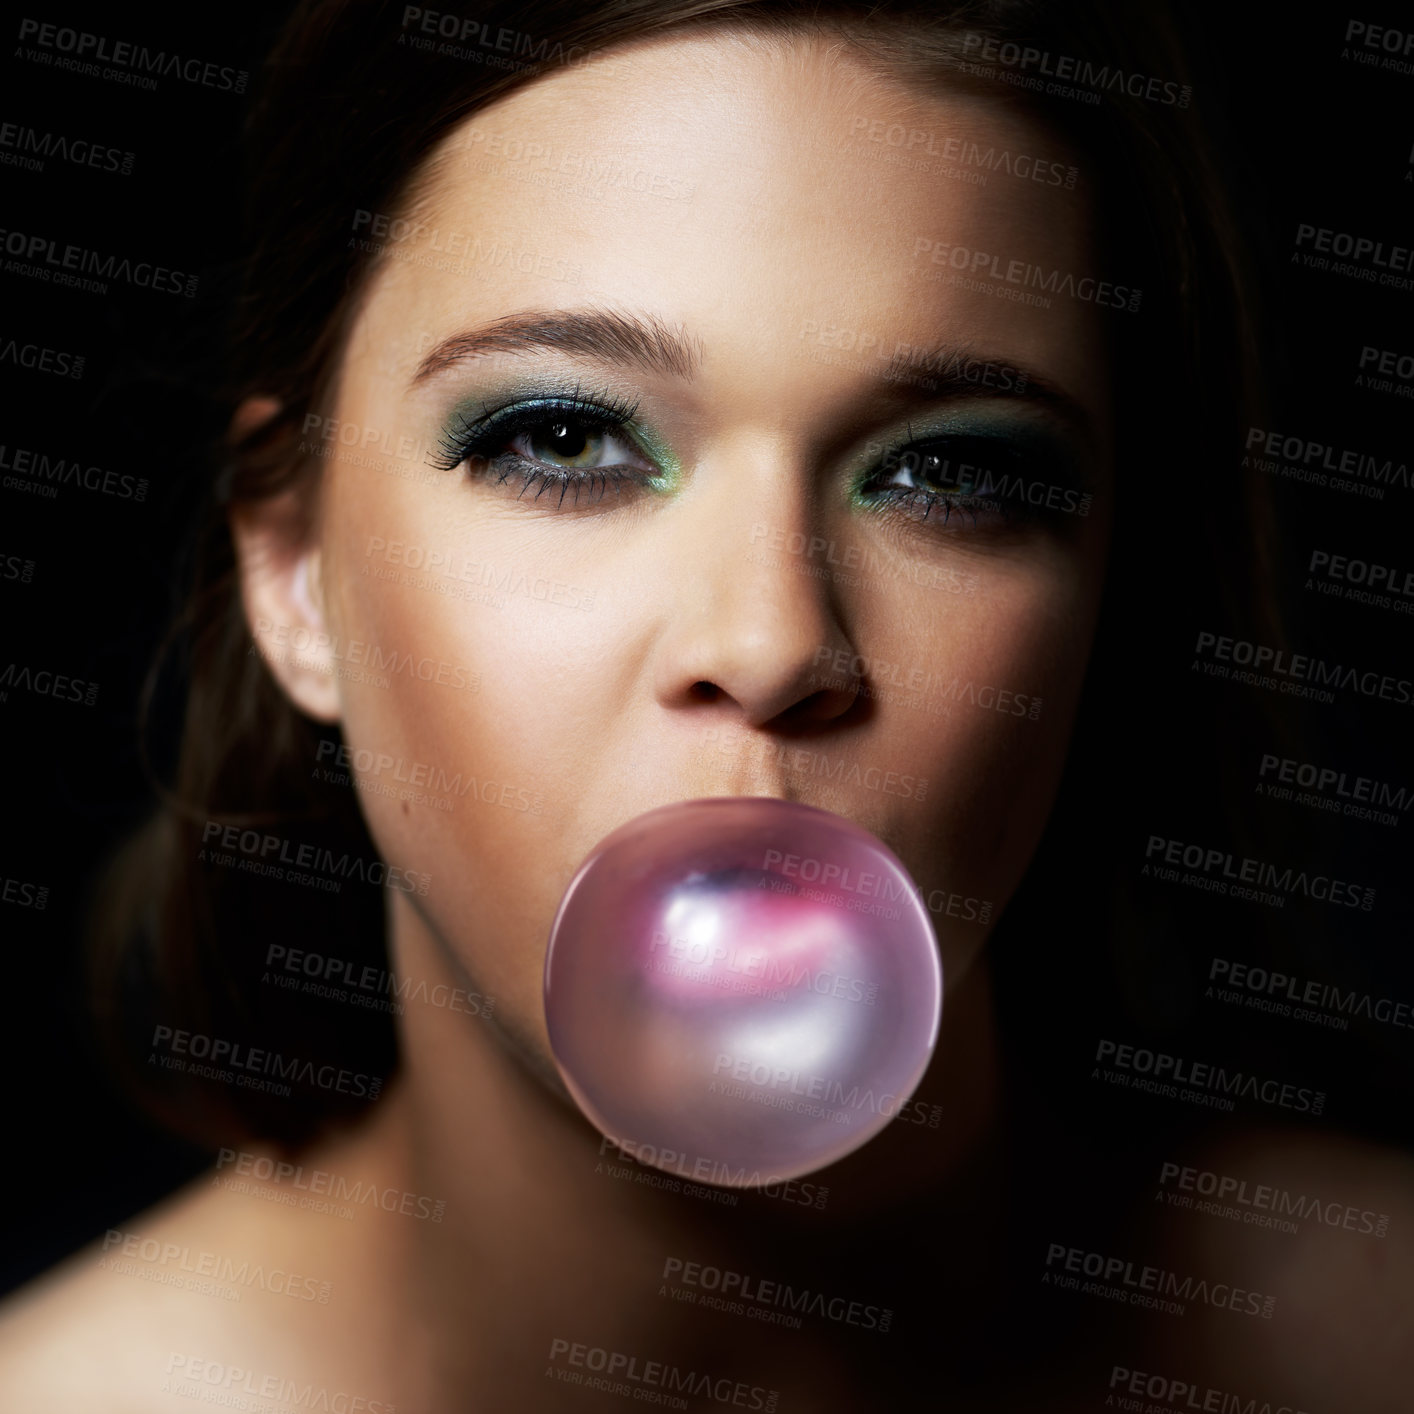 Buy stock photo Shot of a young woman blowing a bubble with her gum against a dark background